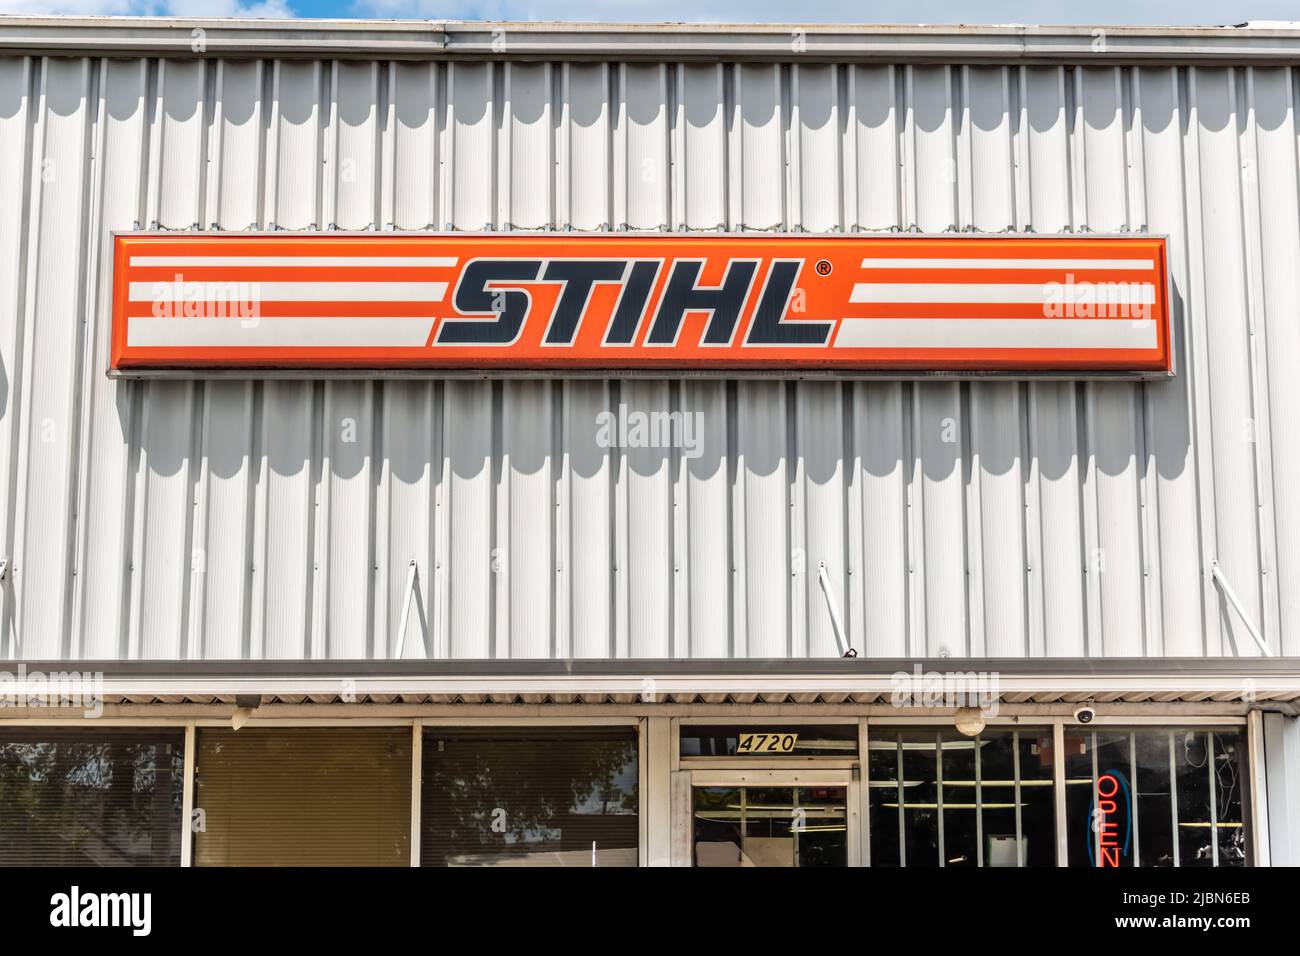 STIHL and Gravely outdoor brand and logo signage in red and orange on an off white ribbed, metal facade in bright sunlight in south Charlotte, NC. Stock Photo